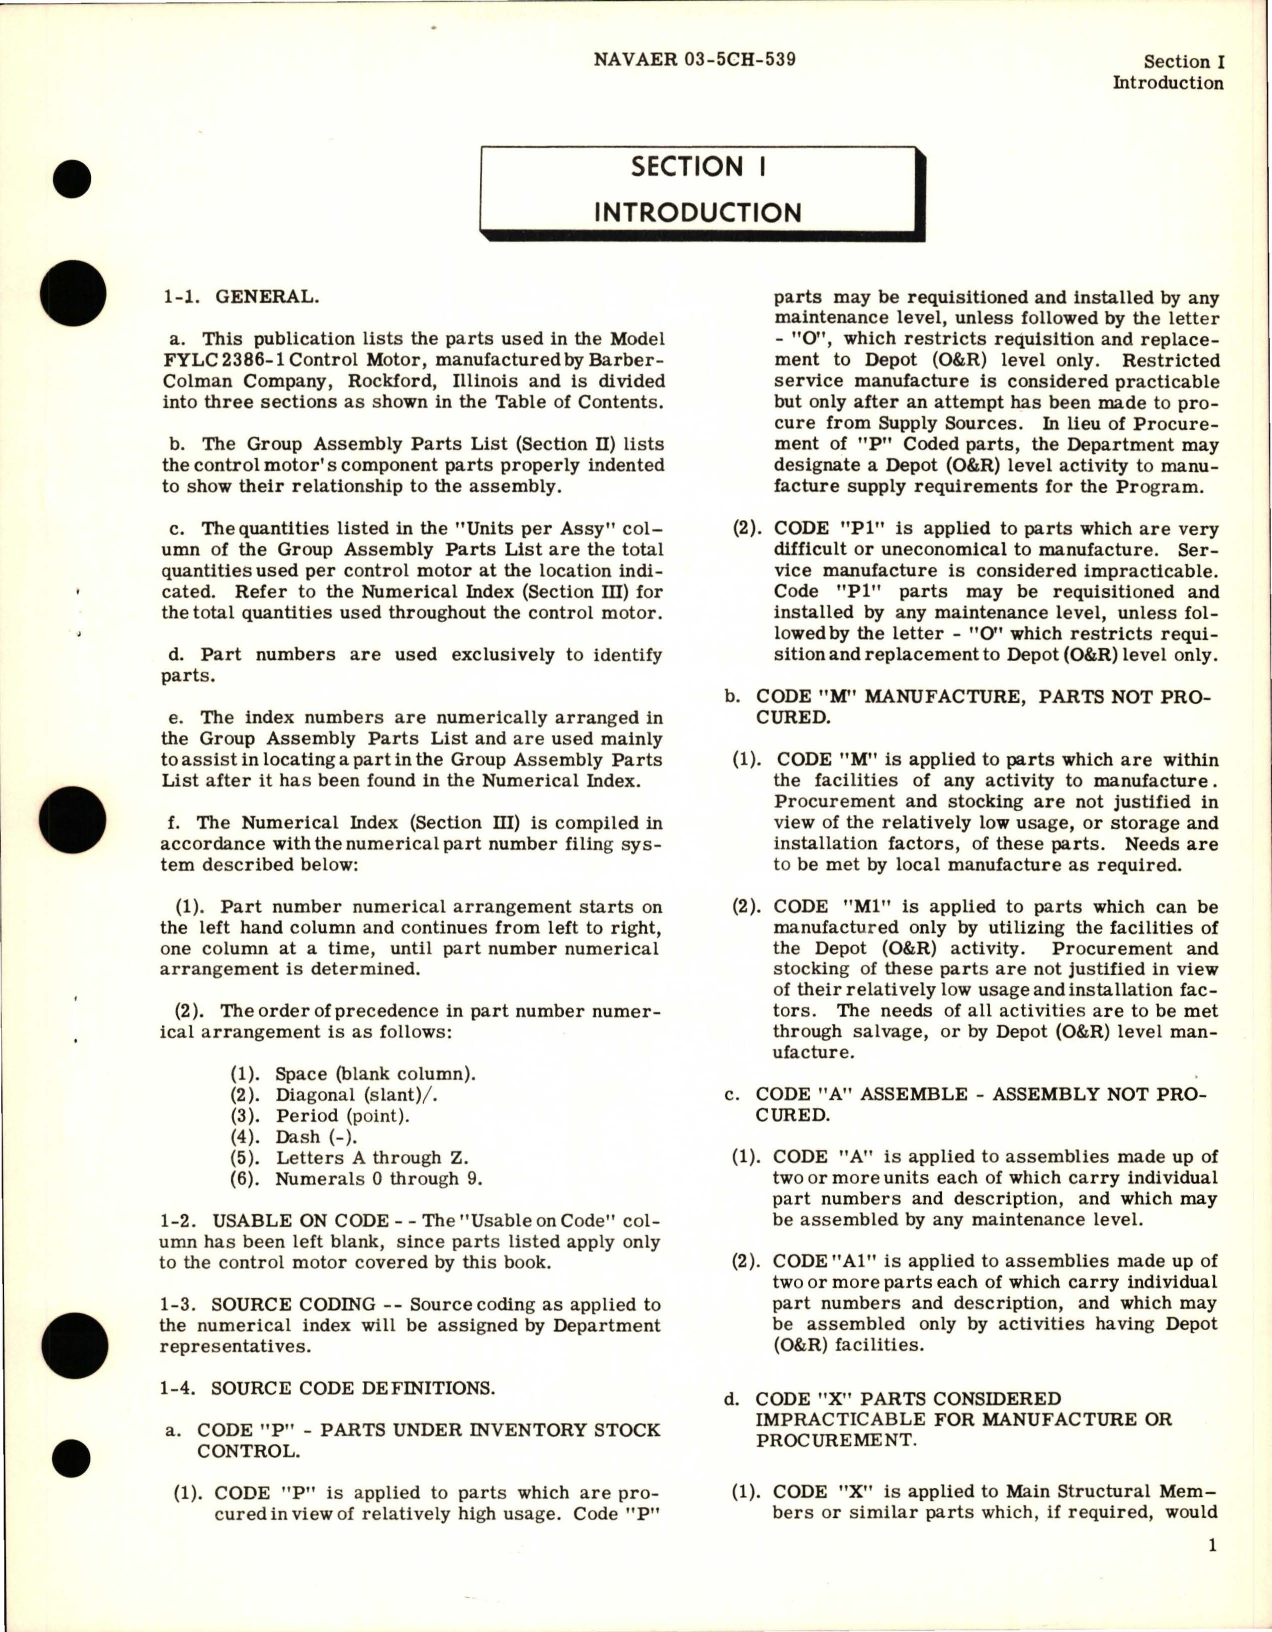 Sample page 5 from AirCorps Library document: Parts Catalog for Control Motor - Model FYLC 2386-1